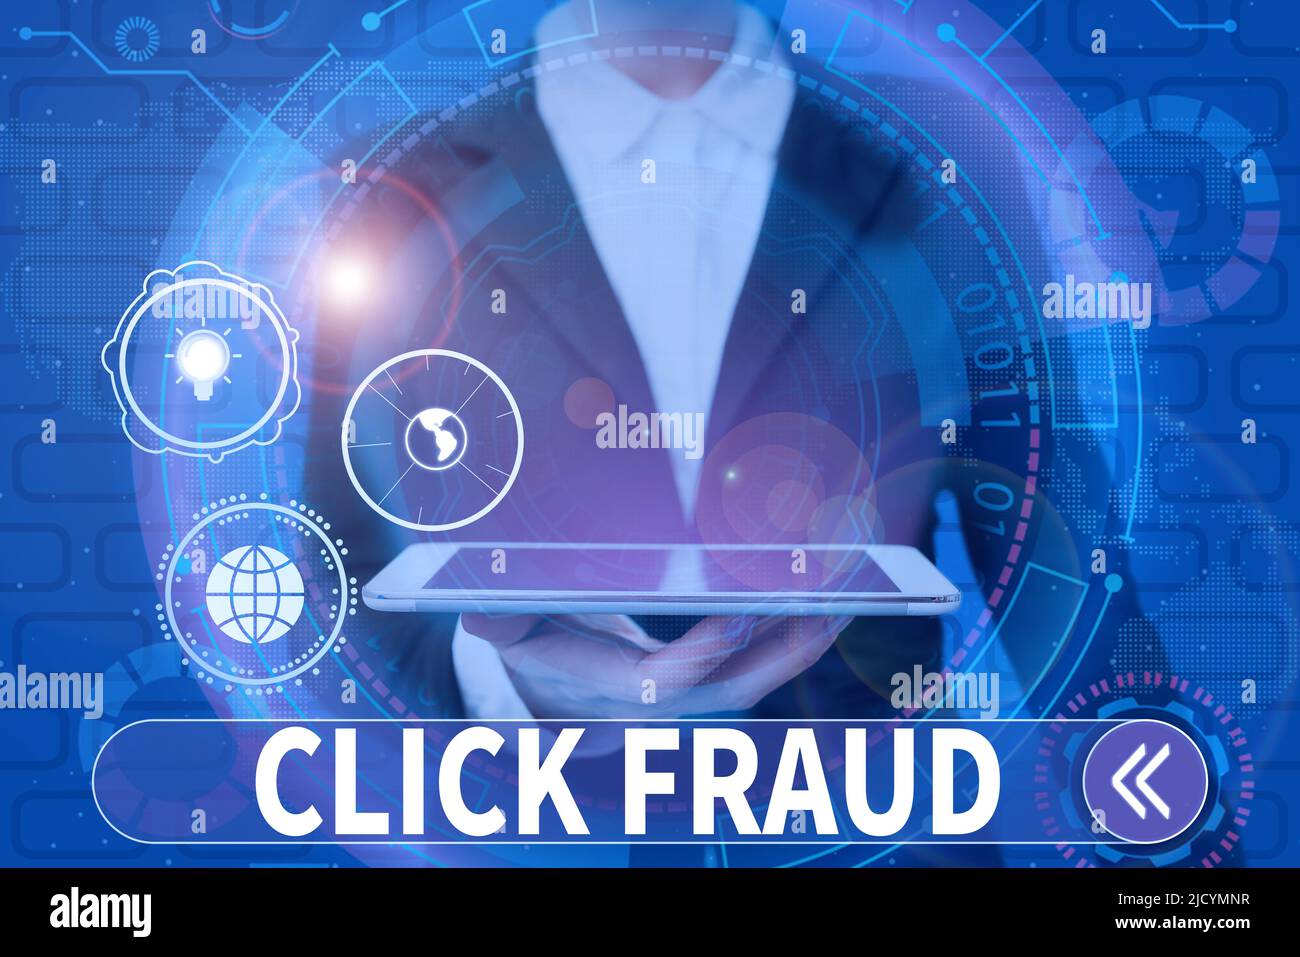 Text showing inspiration Click Fraud, Business showcase practice of repeatedly clicking on advertisement hosted website Lady in suit holding electrica Stock Photo